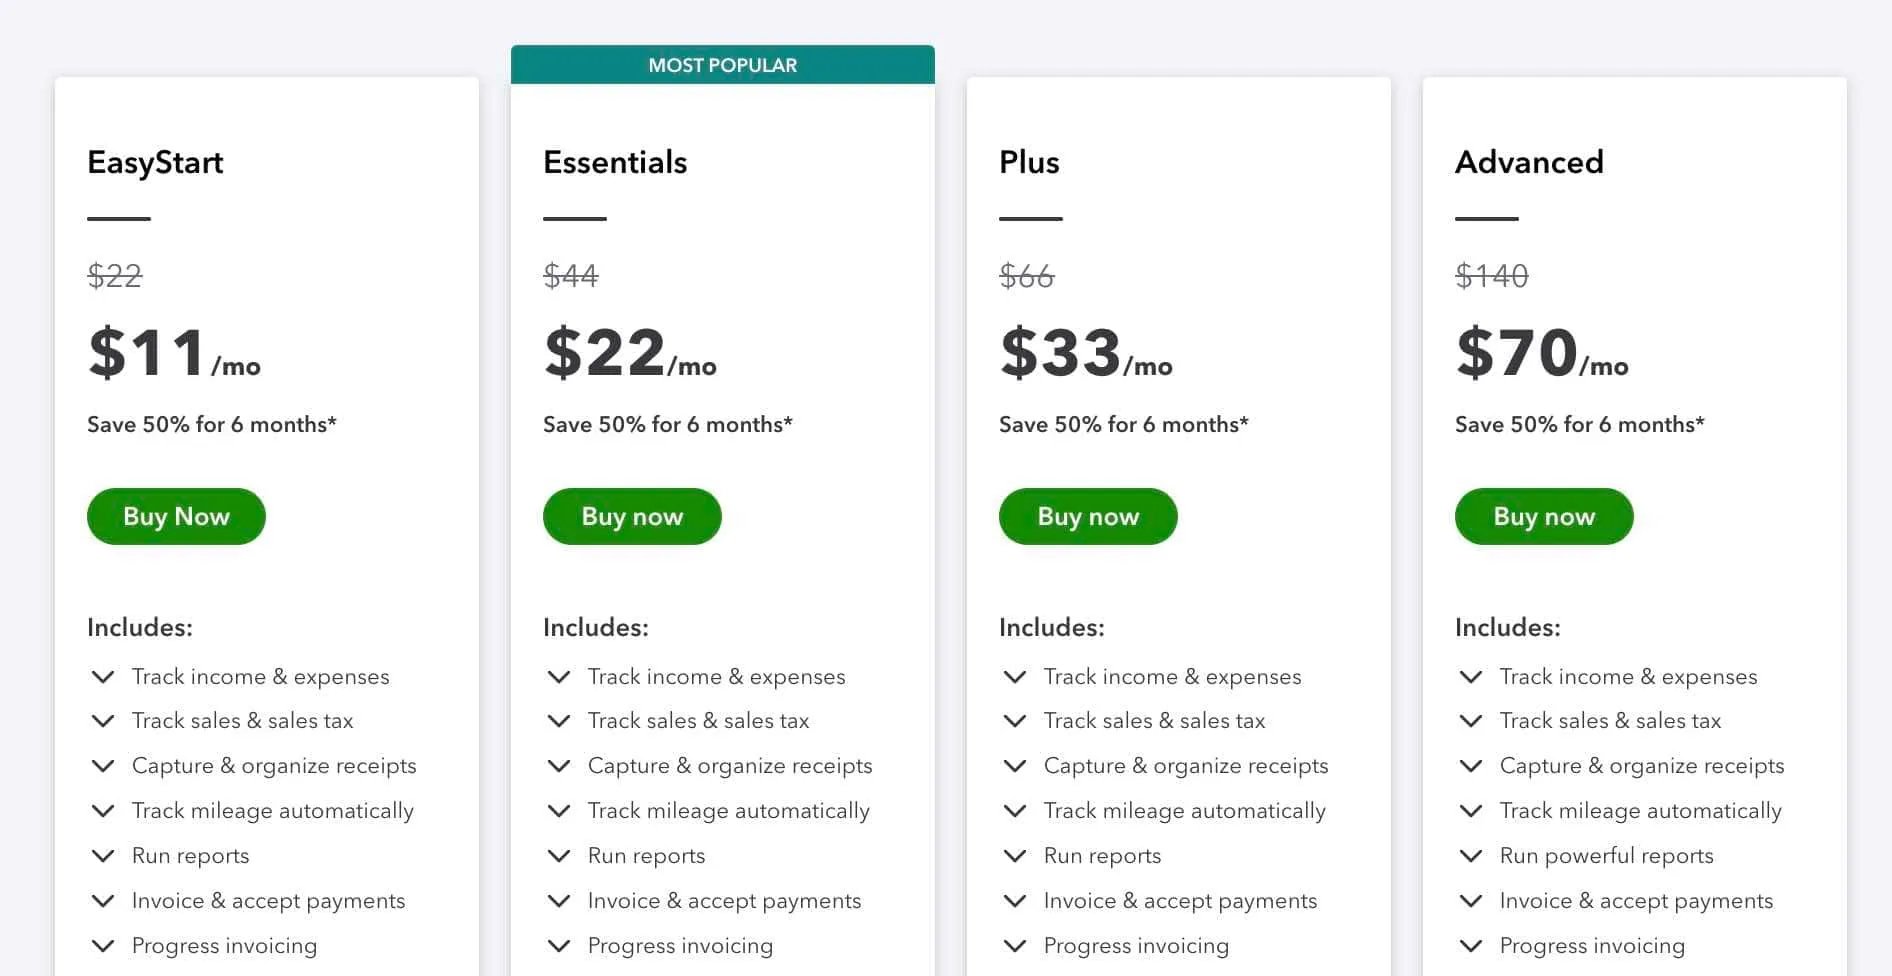 How To Price A SaaS Product